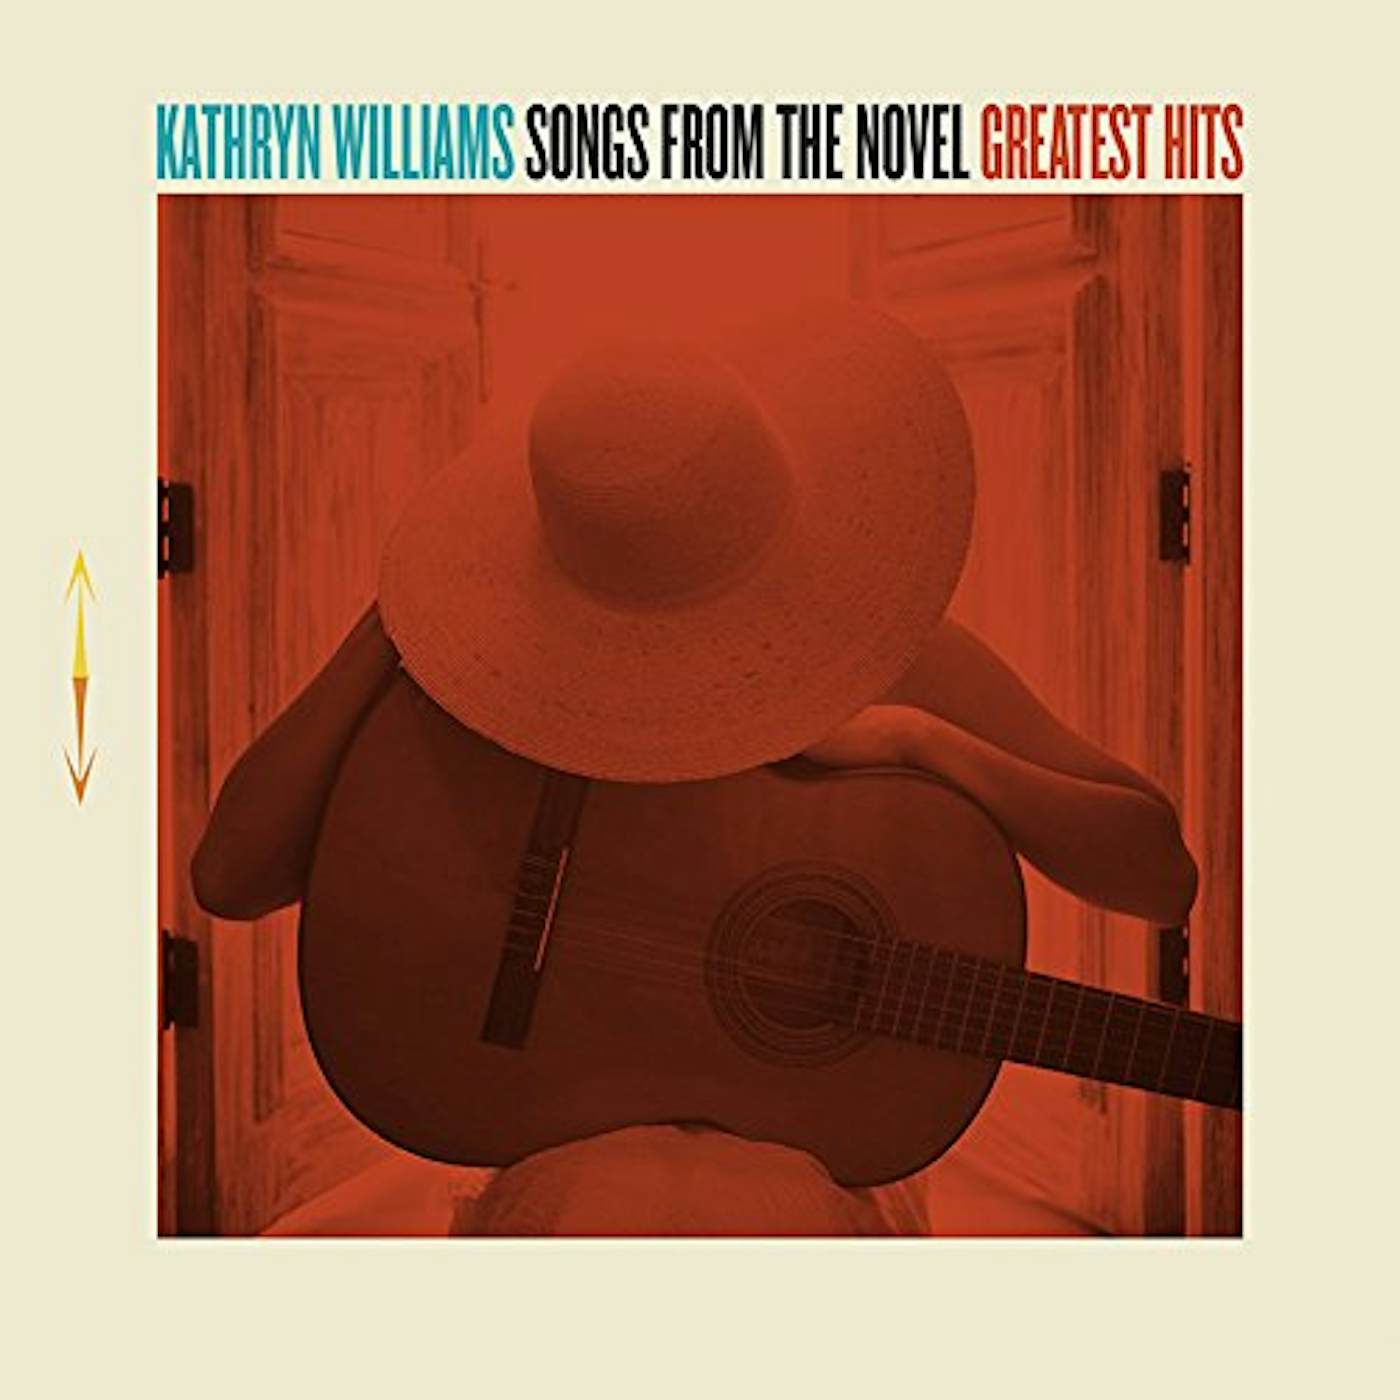 Kathryn Williams Songs from the Novel Greatest Hits Vinyl Record